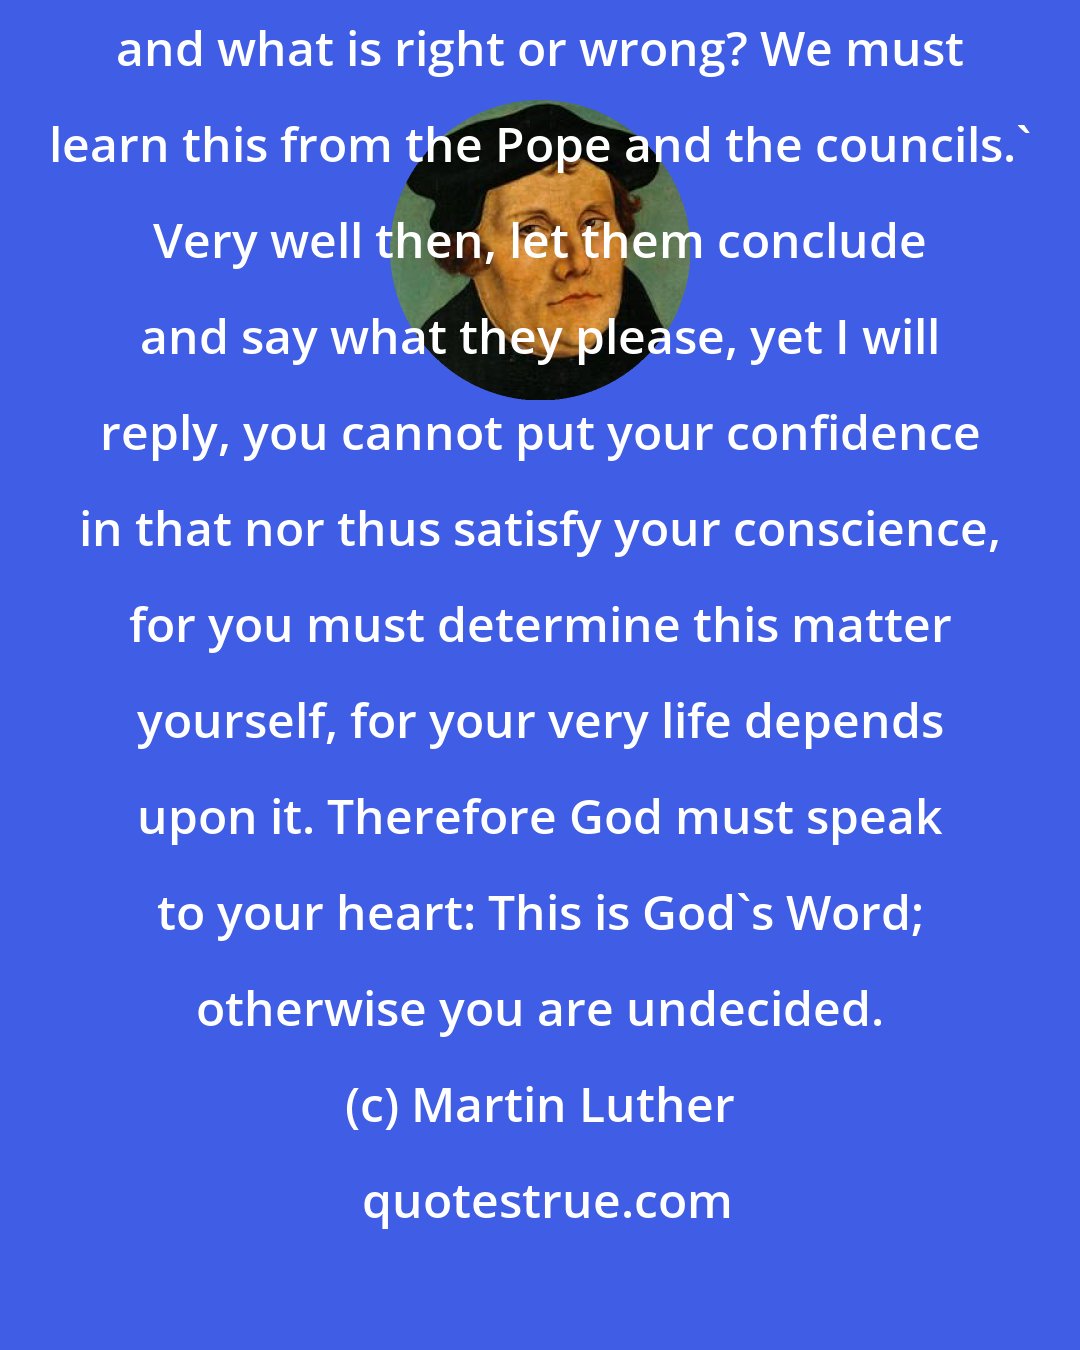 Martin Luther: Then they began to say: 'Yes, but how can we know what is God's Word, and what is right or wrong? We must learn this from the Pope and the councils.' Very well then, let them conclude and say what they please, yet I will reply, you cannot put your confidence in that nor thus satisfy your conscience, for you must determine this matter yourself, for your very life depends upon it. Therefore God must speak to your heart: This is God's Word; otherwise you are undecided.